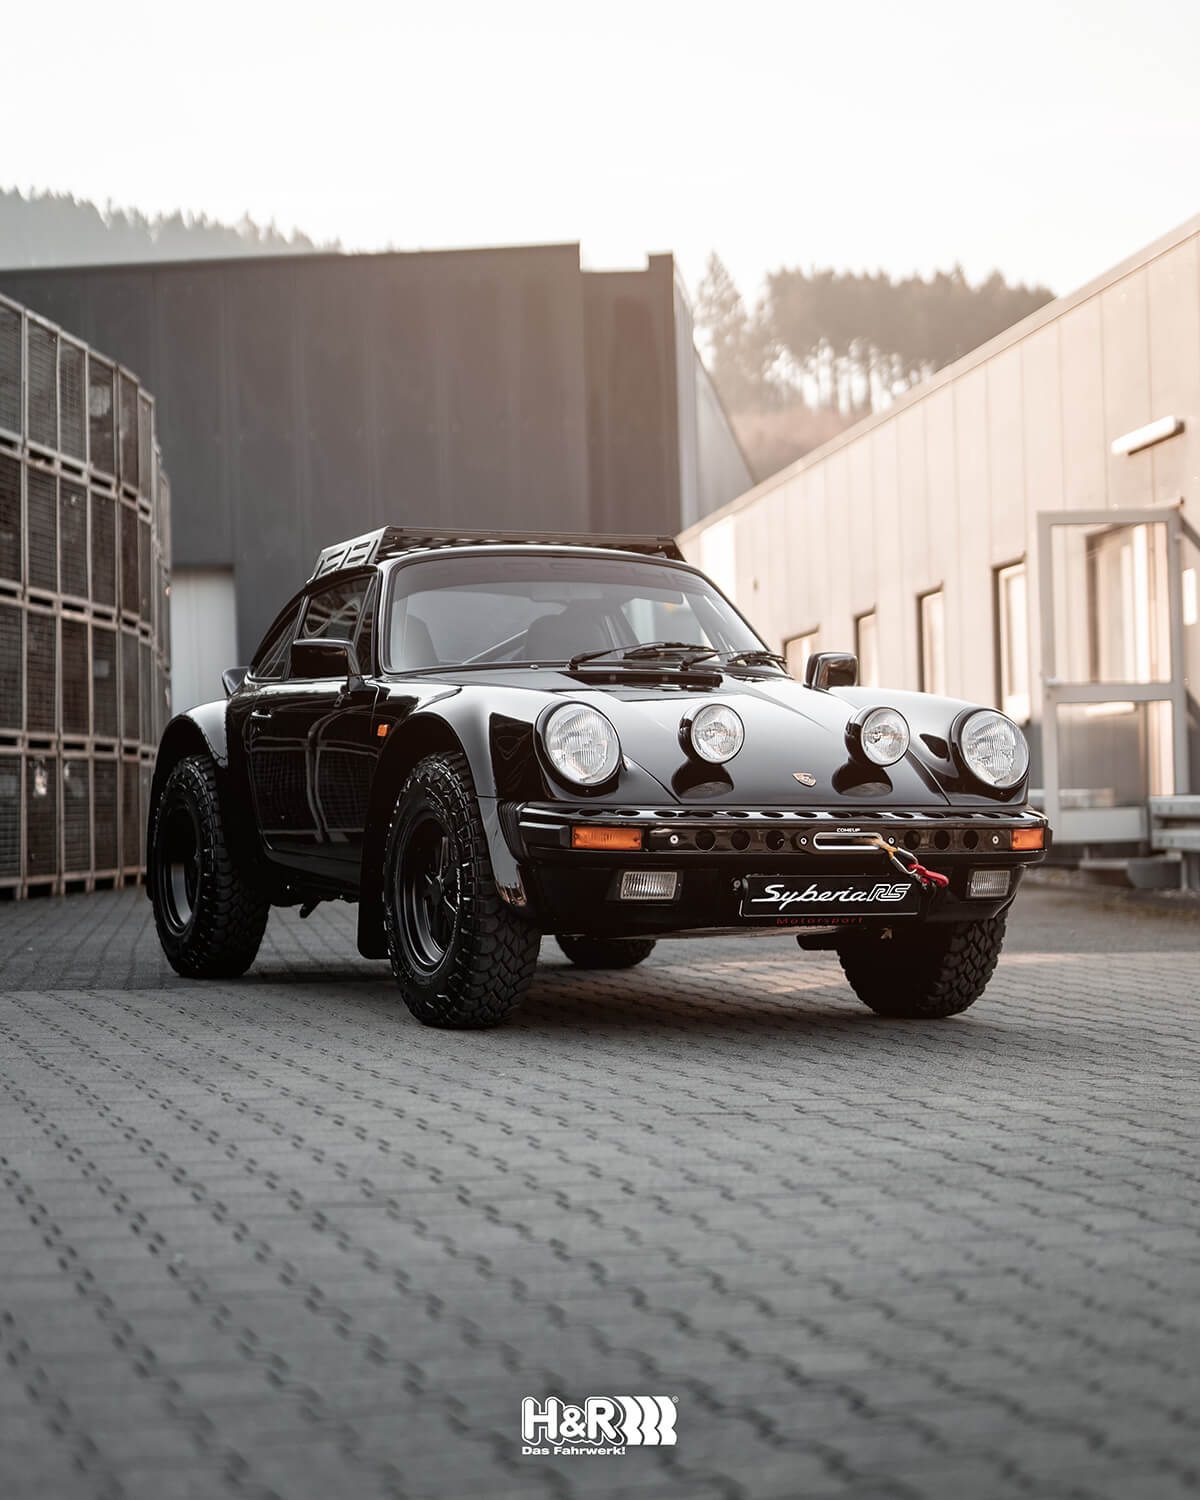 Lifted Porsche 911 with mud tires